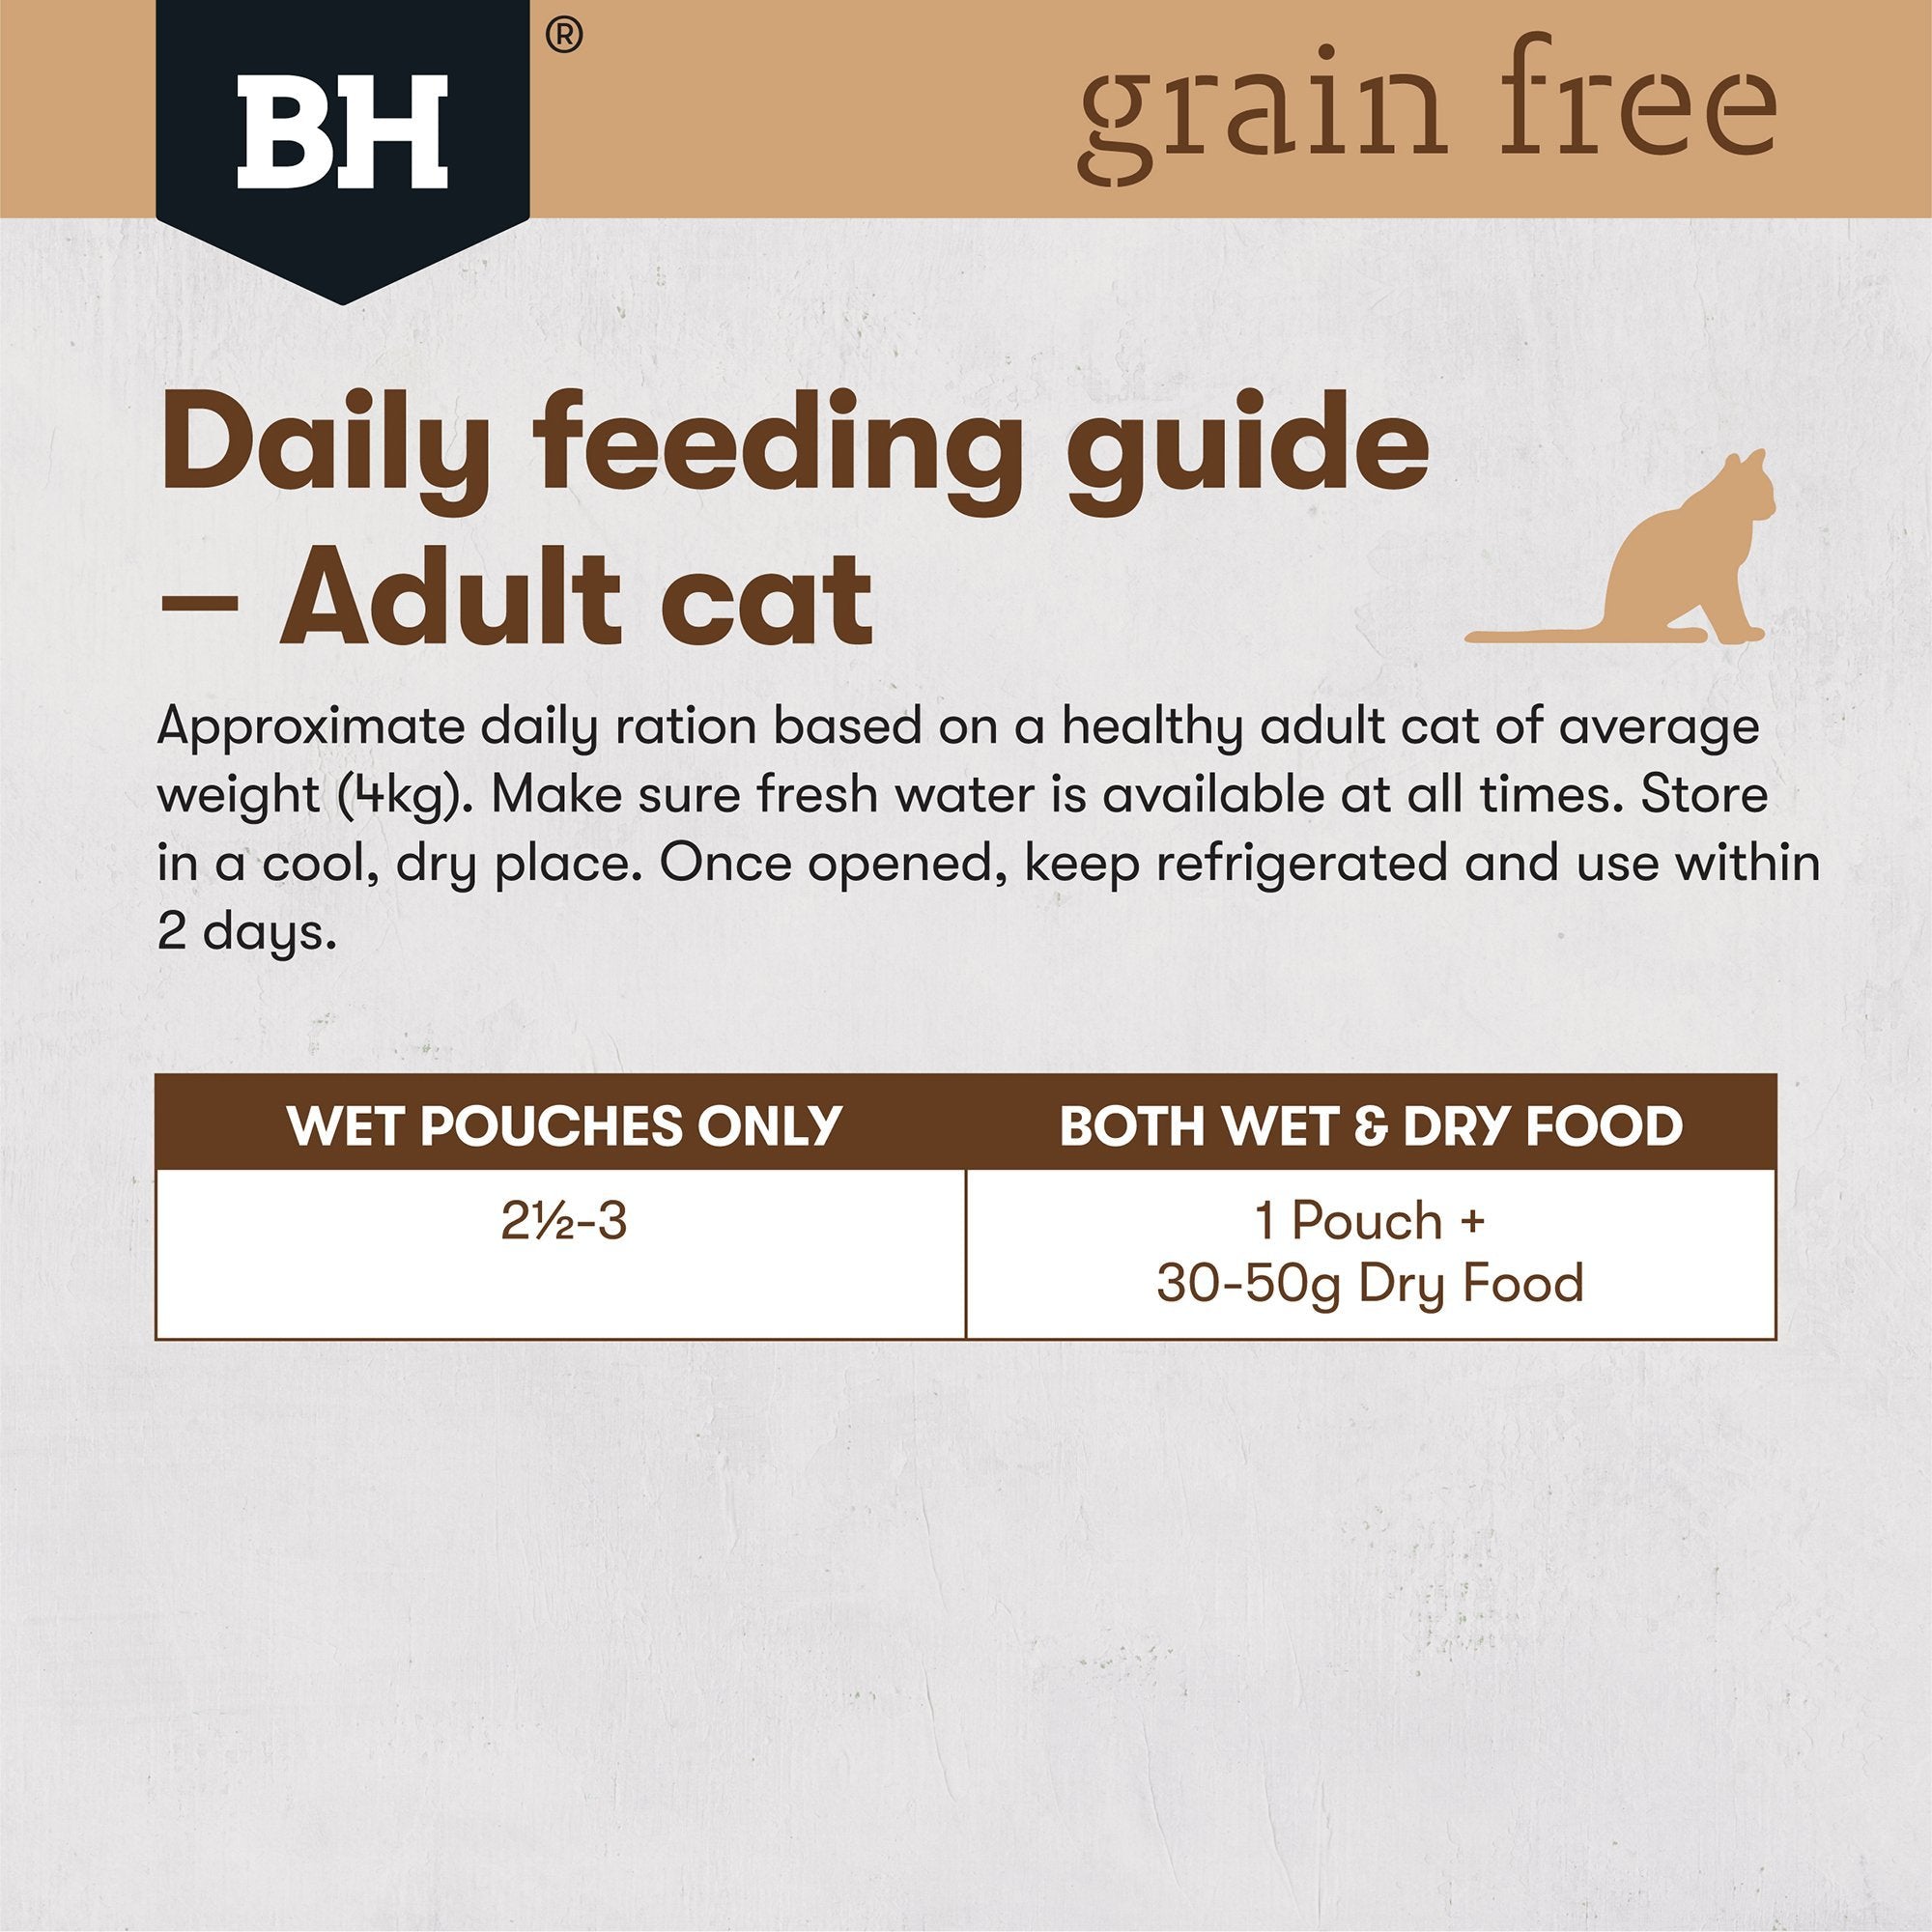 Black Hawk Grain Free Adult Chicken With Tuna Ocean Fish And Gravy Wet Cat Food Pouches 85G